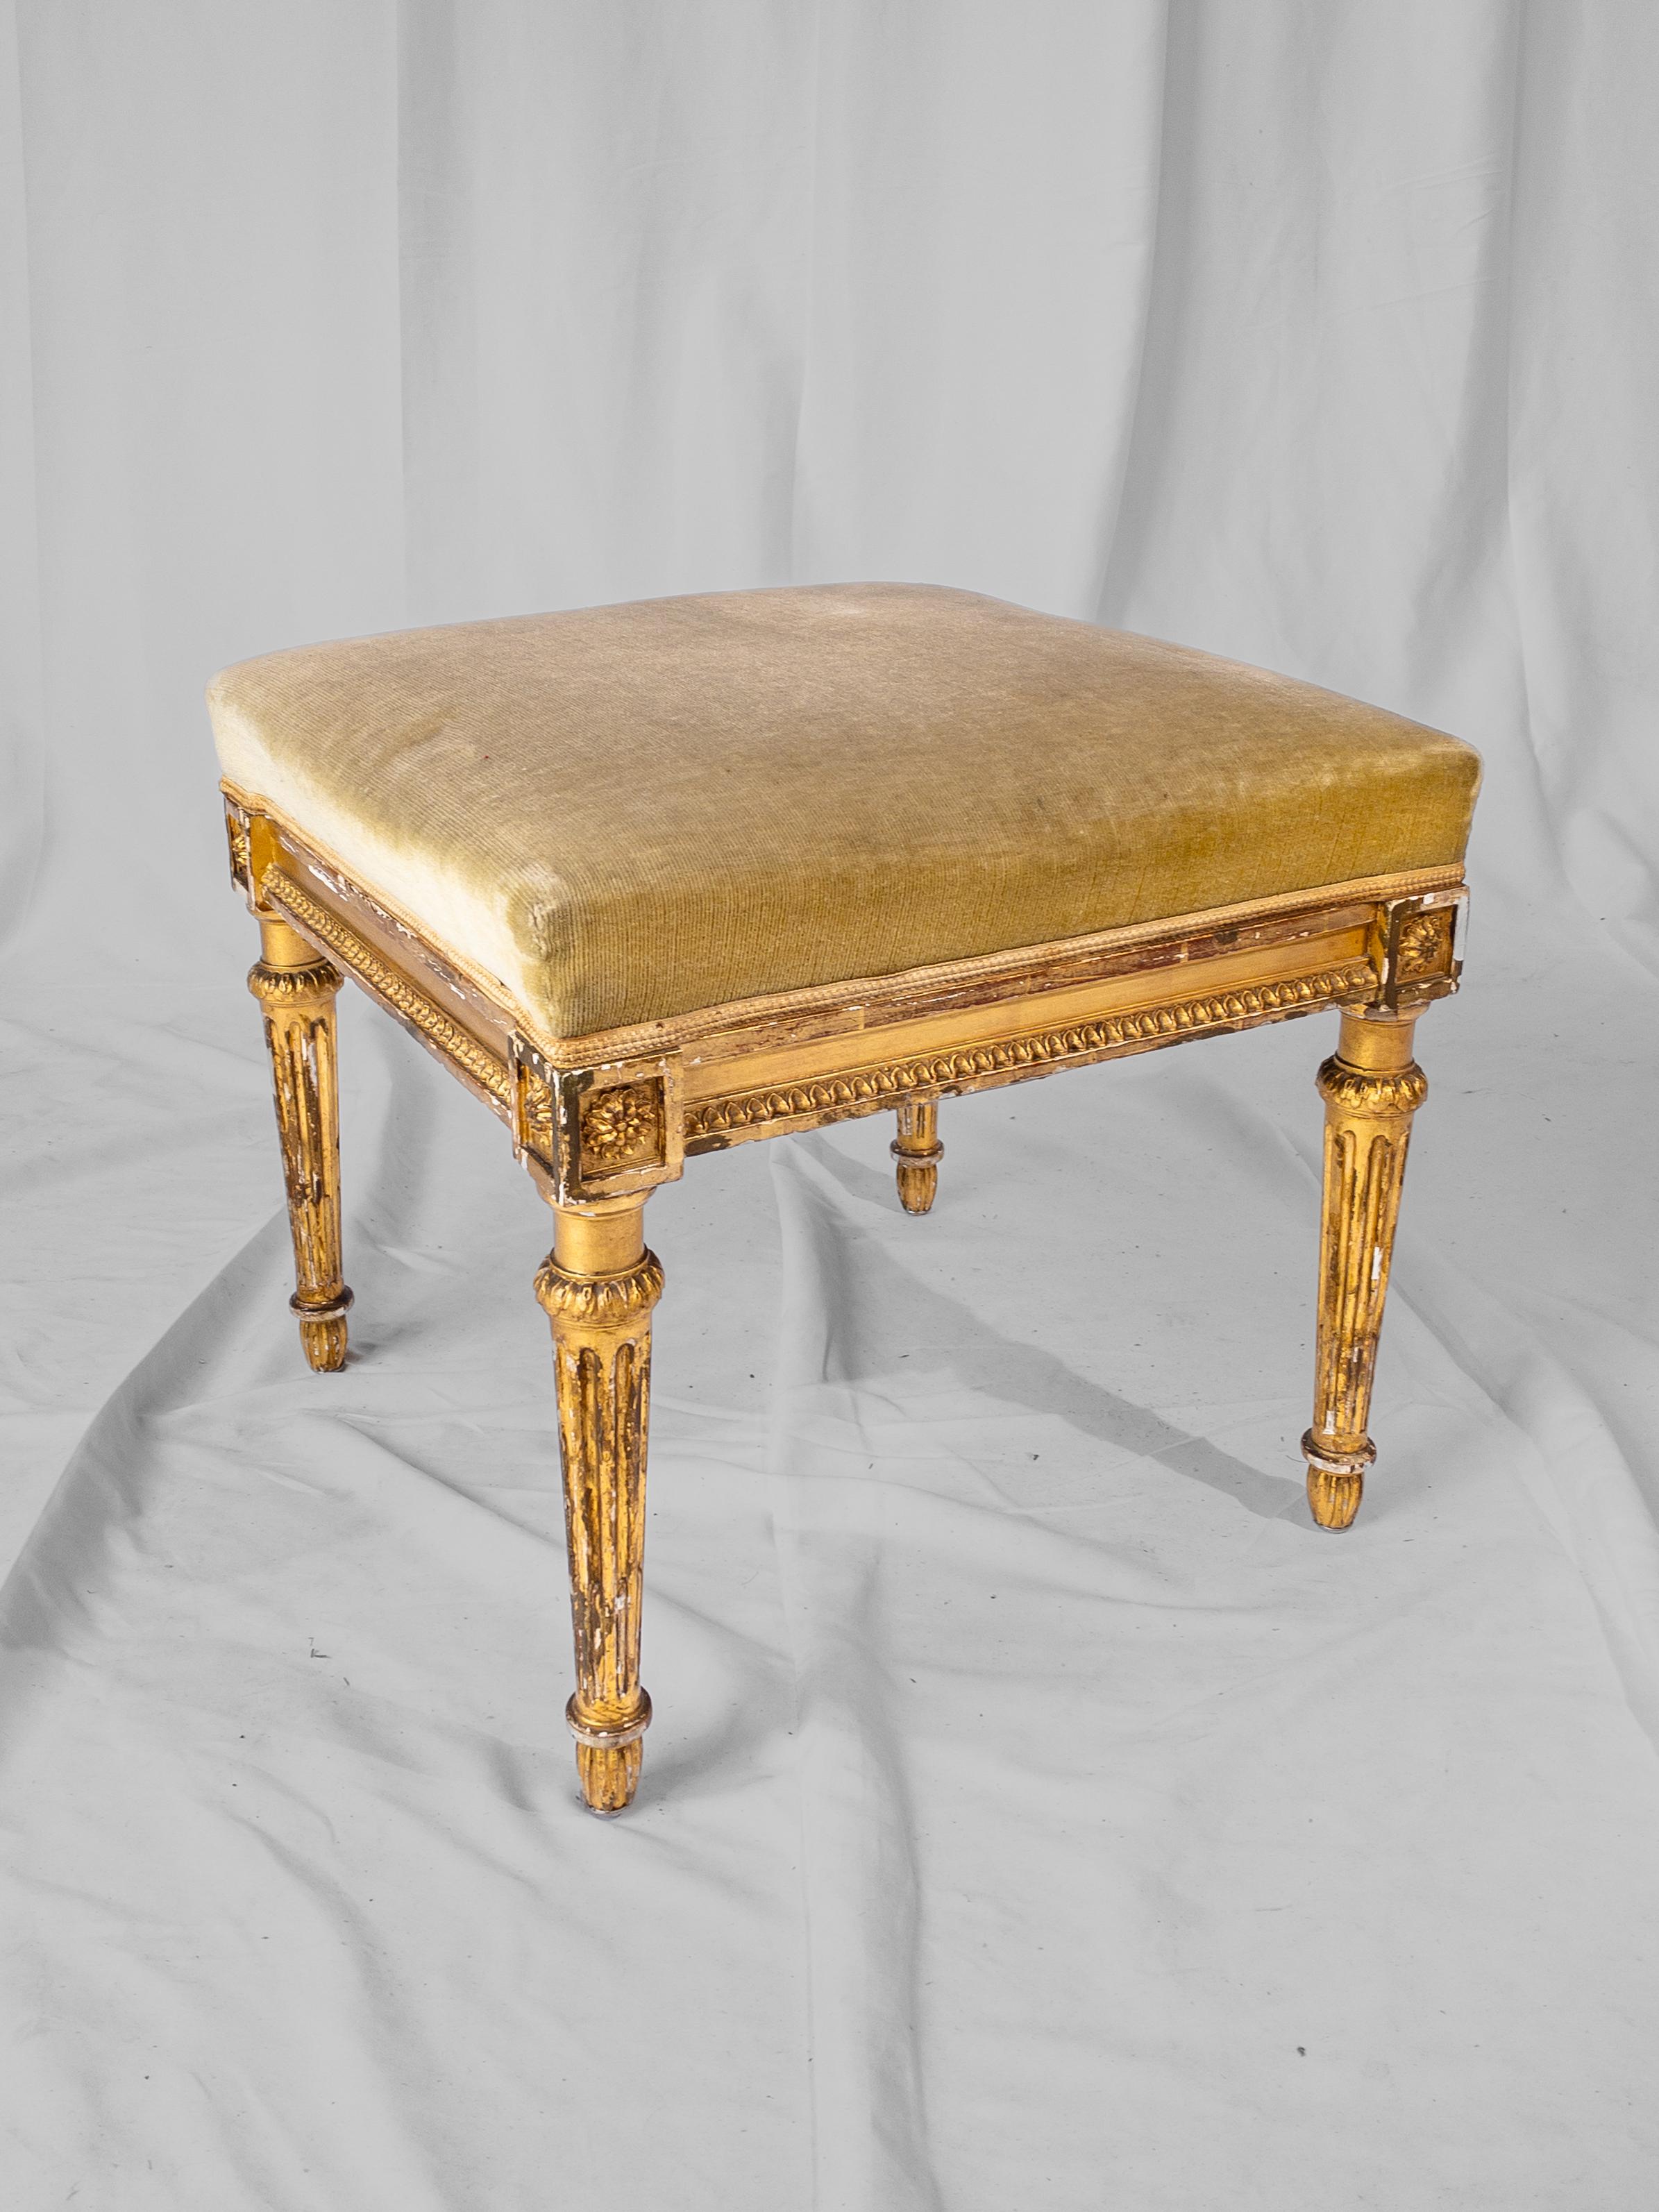 Exquisite and refined, this 19th-century French Louis XVI Style Gilt Stool epitomizes the elegance and sophistication of its era. Crafted with meticulous attention to detail, the stool features a lavish gold gilt frame adorned with delicate floral